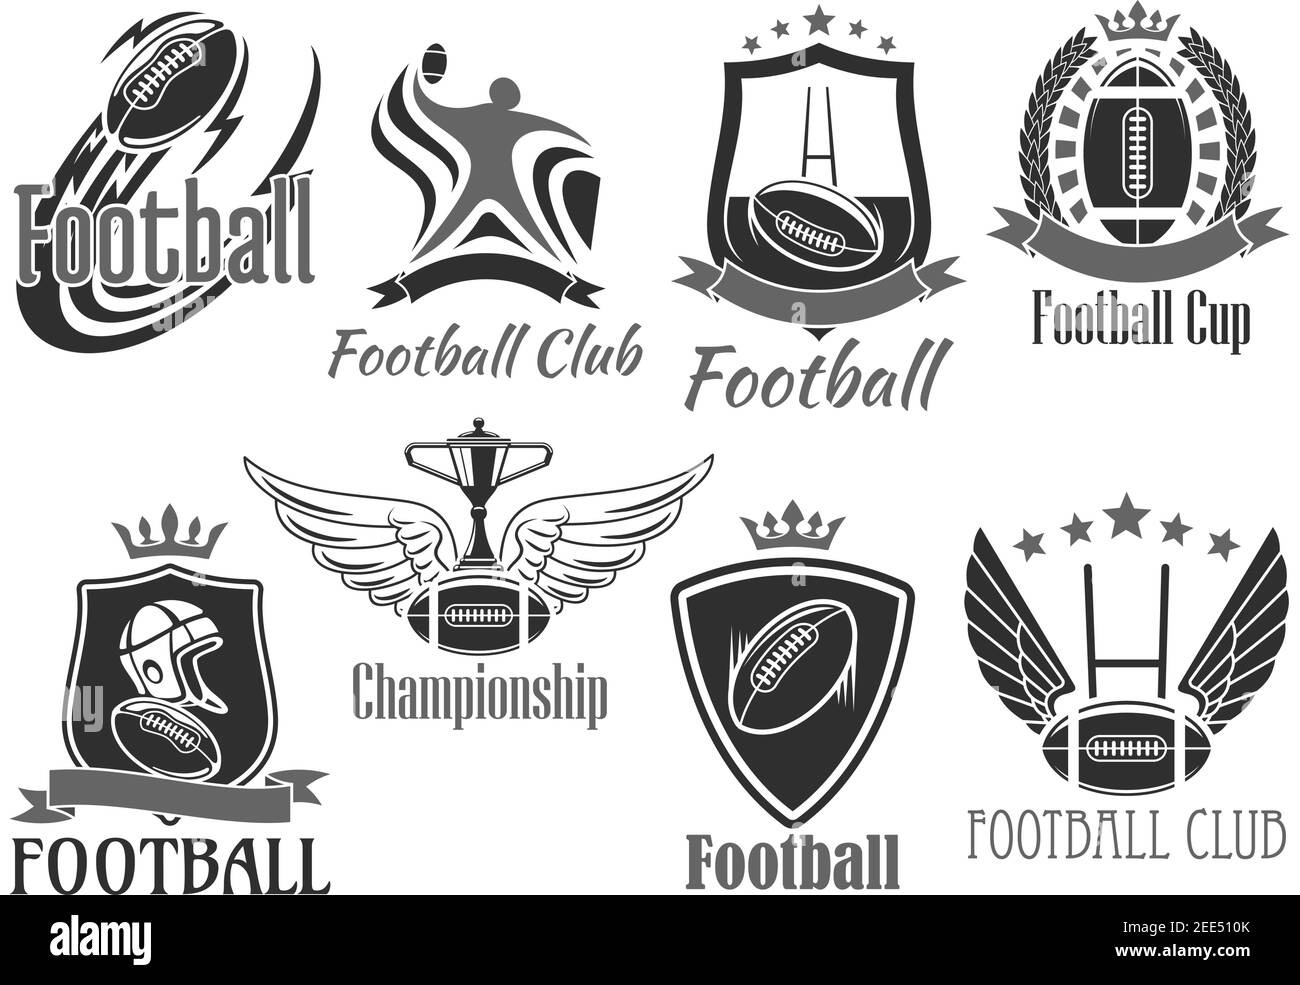 Rugby football club tournament or championship cup badges set. Vector icons of flying rugby ball on wings, player helmet, champion ribbon and winner g Stock Vector